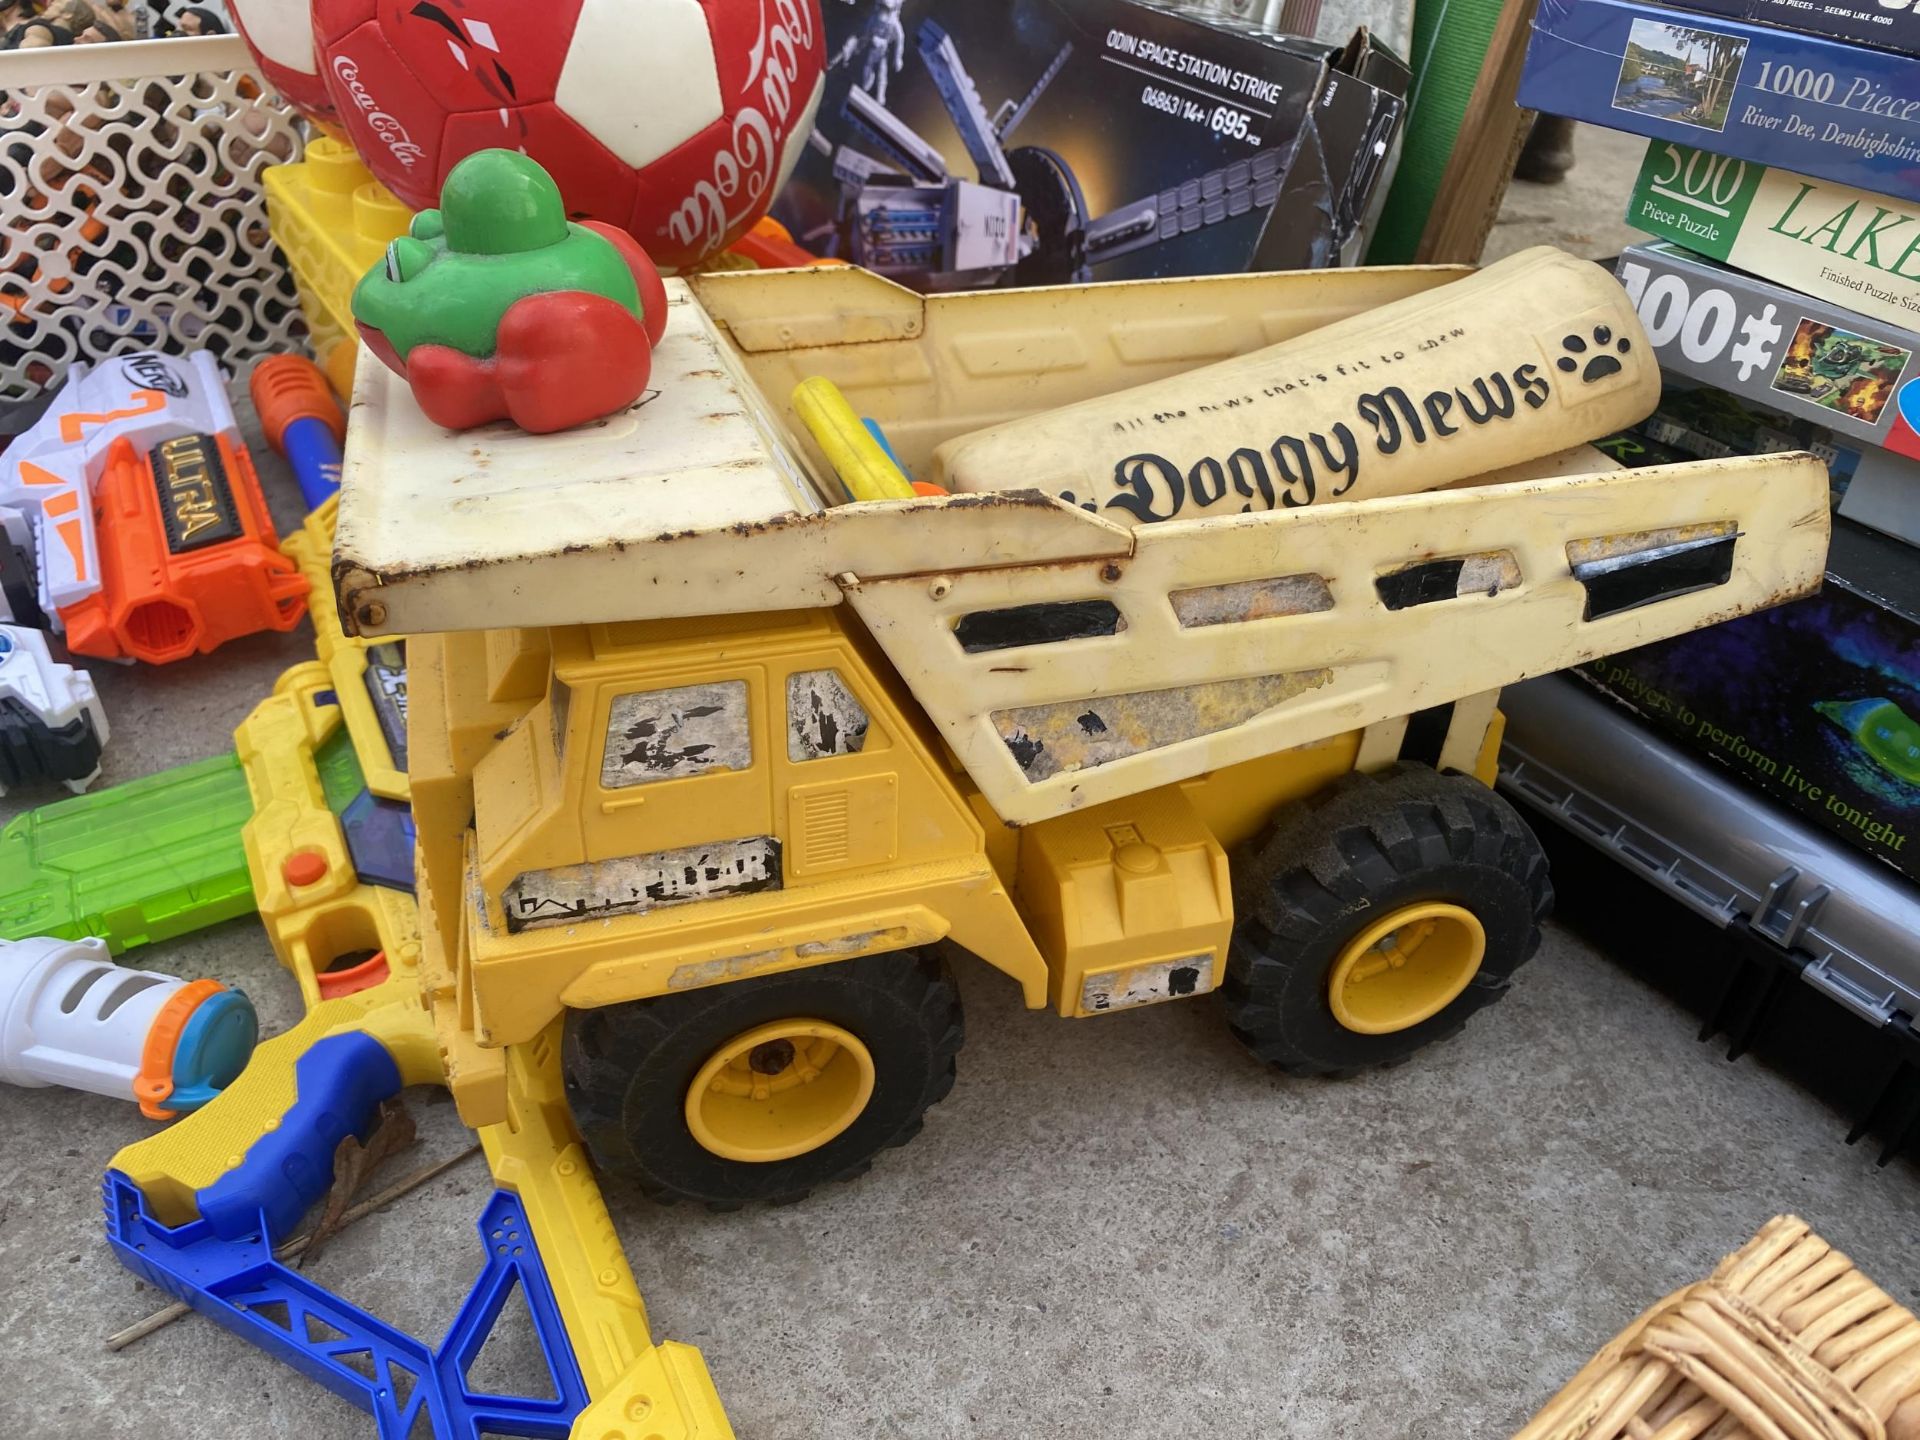 A LARGE ASSORTMENT OF TOYS TO INCLUDE WRESTLING FIGURES, NERF GUNS AND A DUMPER TRUCK ETC - Image 4 of 7